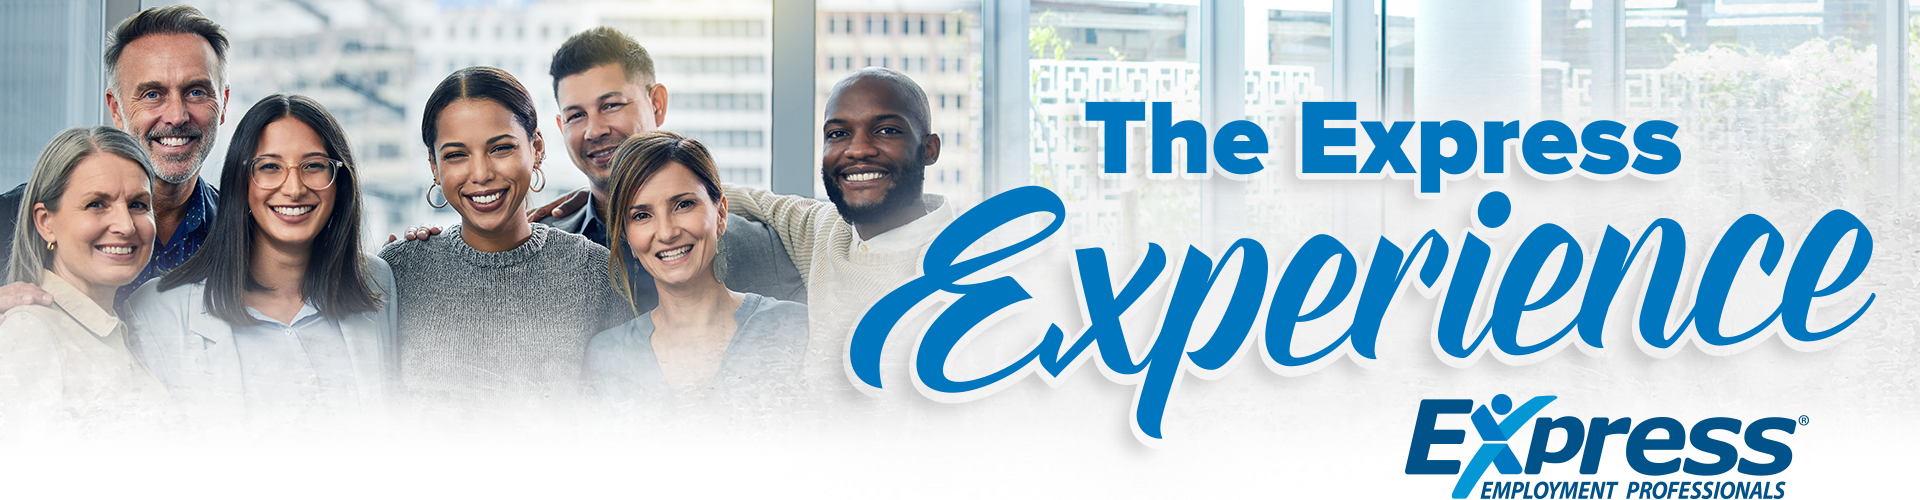 Express-Experience-Header-Banner-with-Text